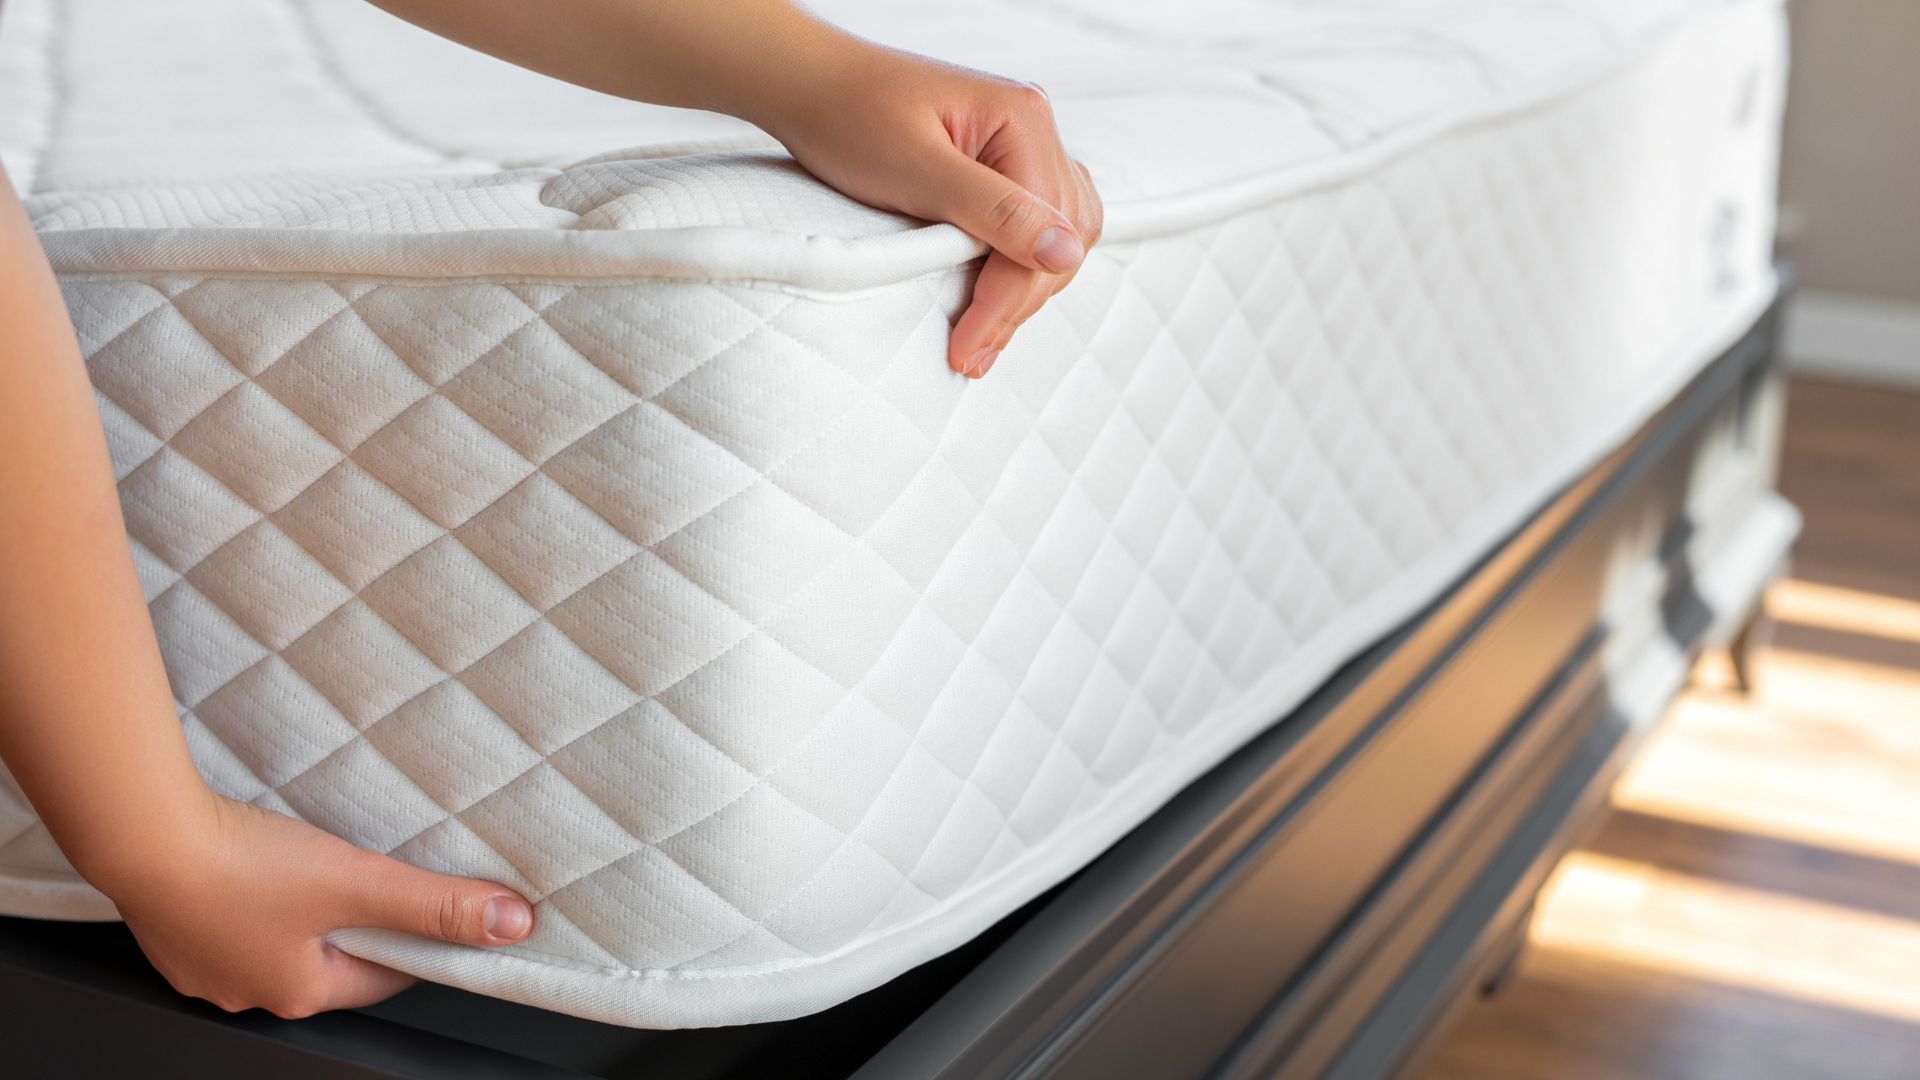 A man lifts the corner of a white mattress to check the quality